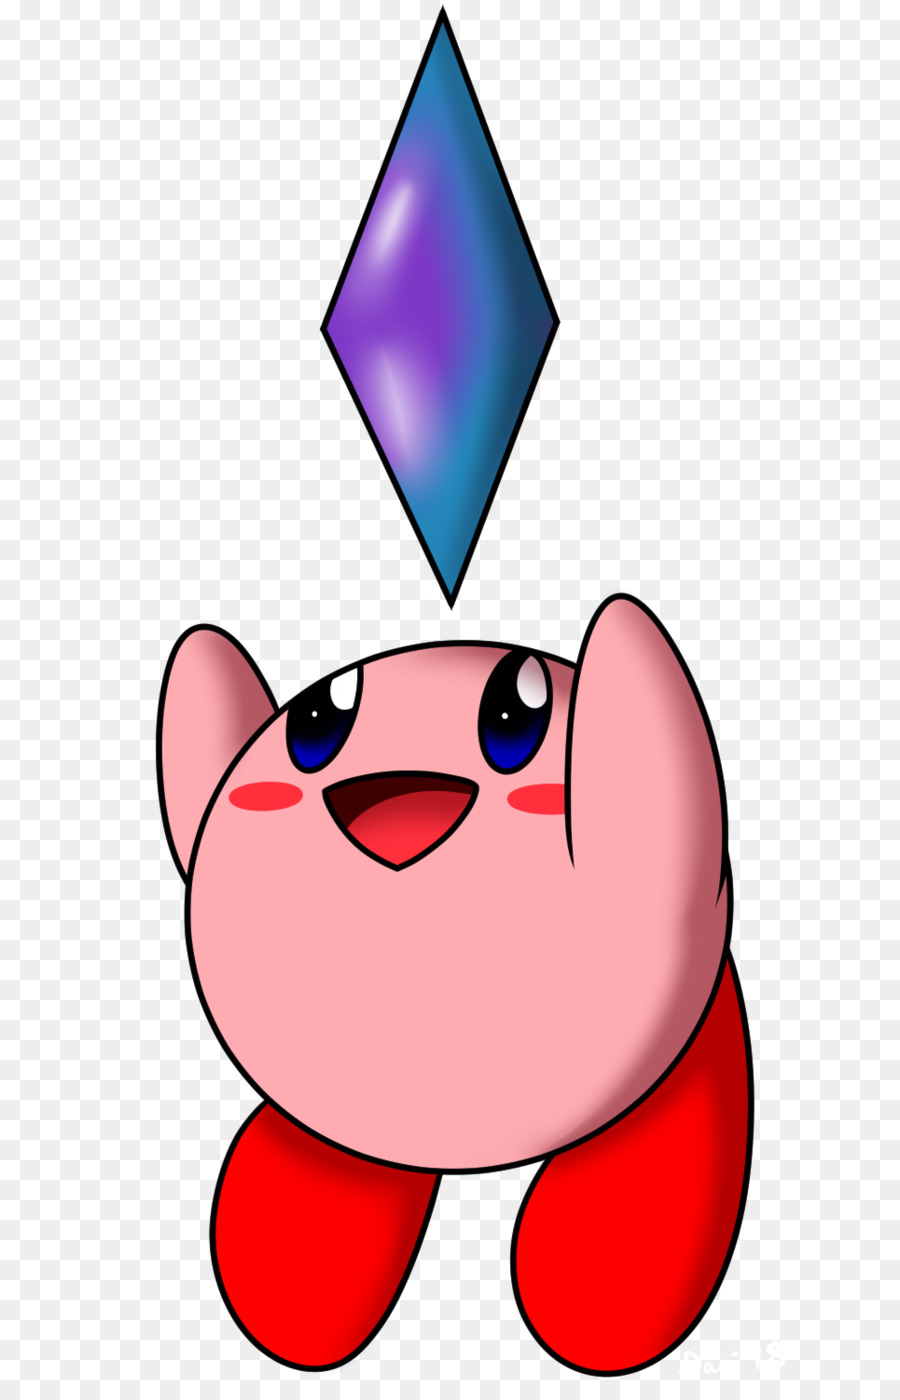 Video Games Kirby 64: The Crystal Shards Irodzuki Tingle no Koi no Balloon Trip Clip art - kirby streamer png download - 965*1486 - Free Transparent Video Games png Download.